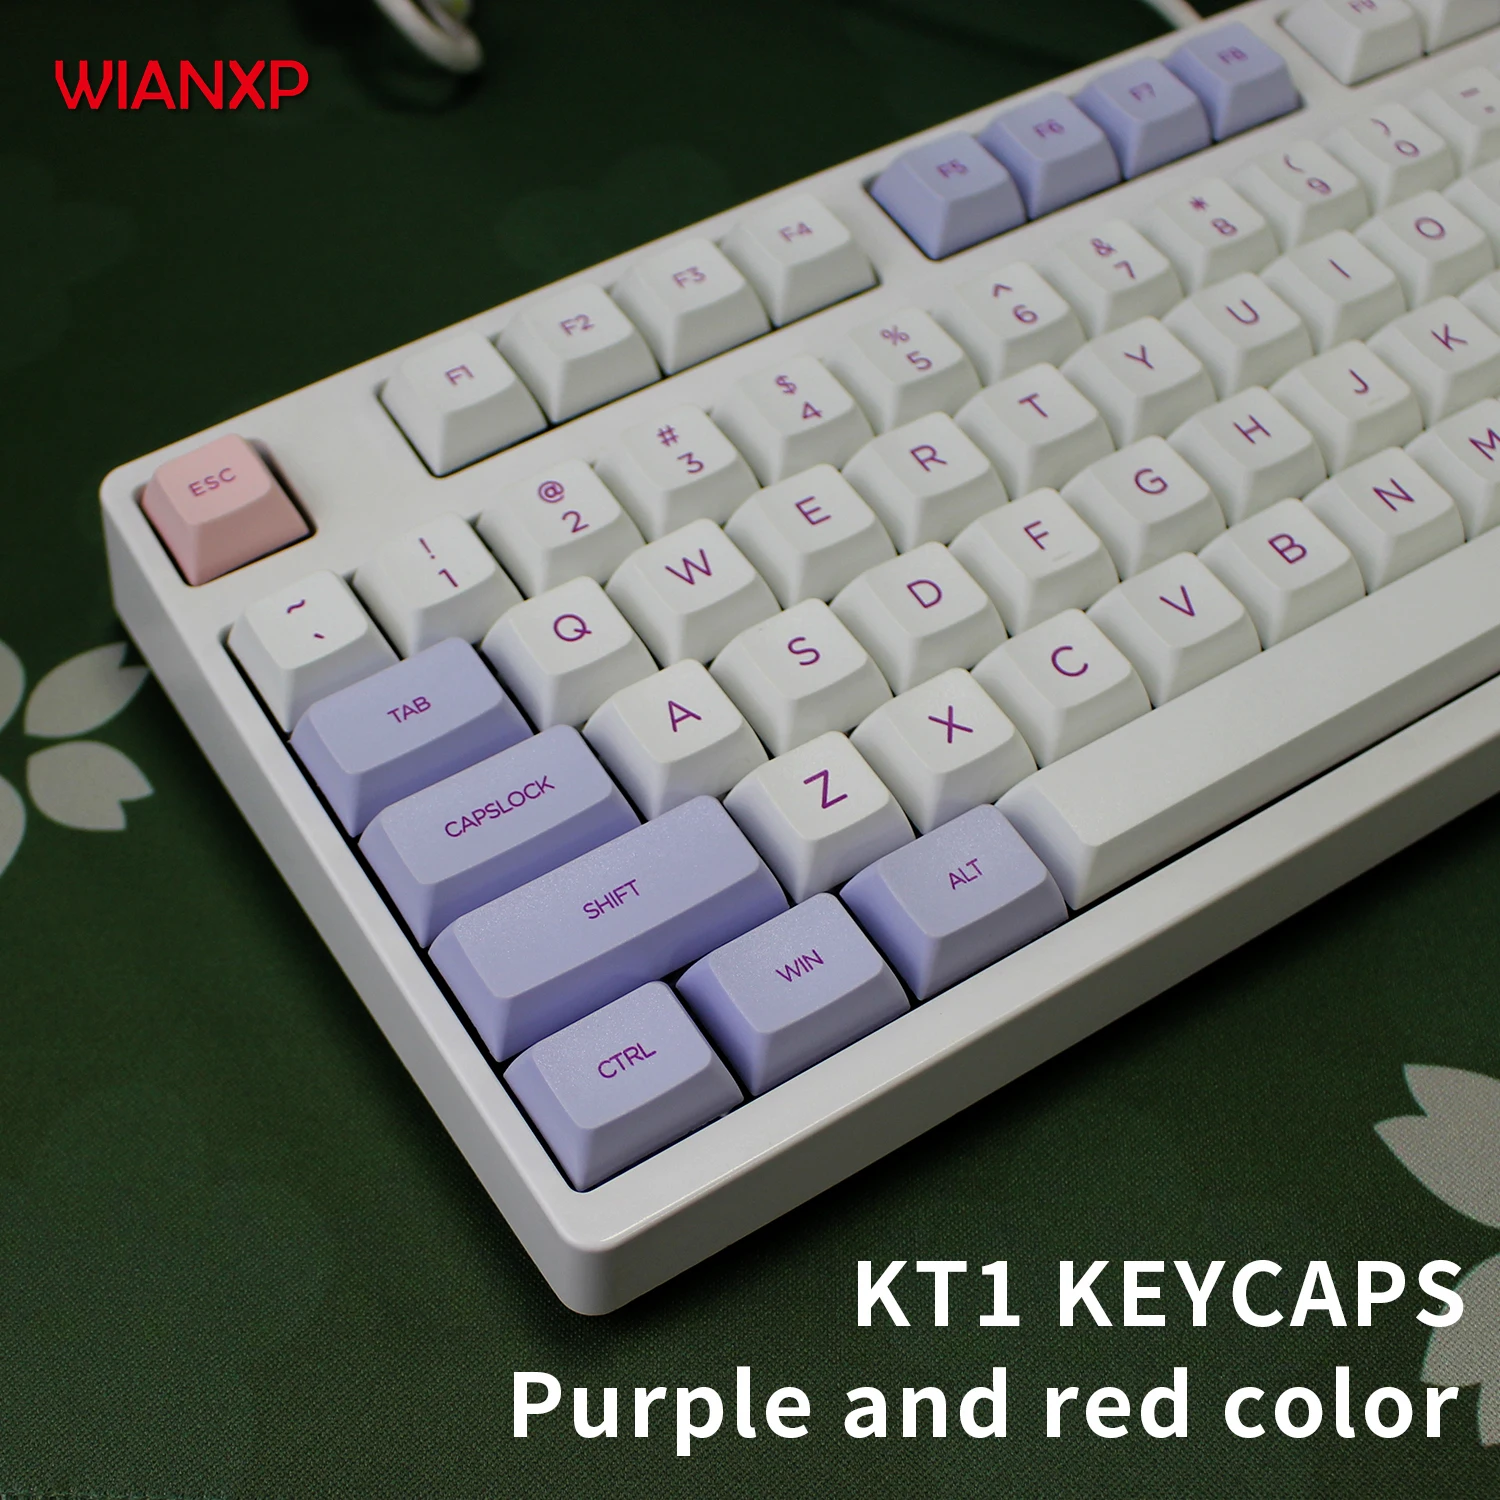 

white and purple color XDAS profile keycap 108 dye sublimated Filco/DUCK/Ikbc MX switch mechanical keyboard keycap